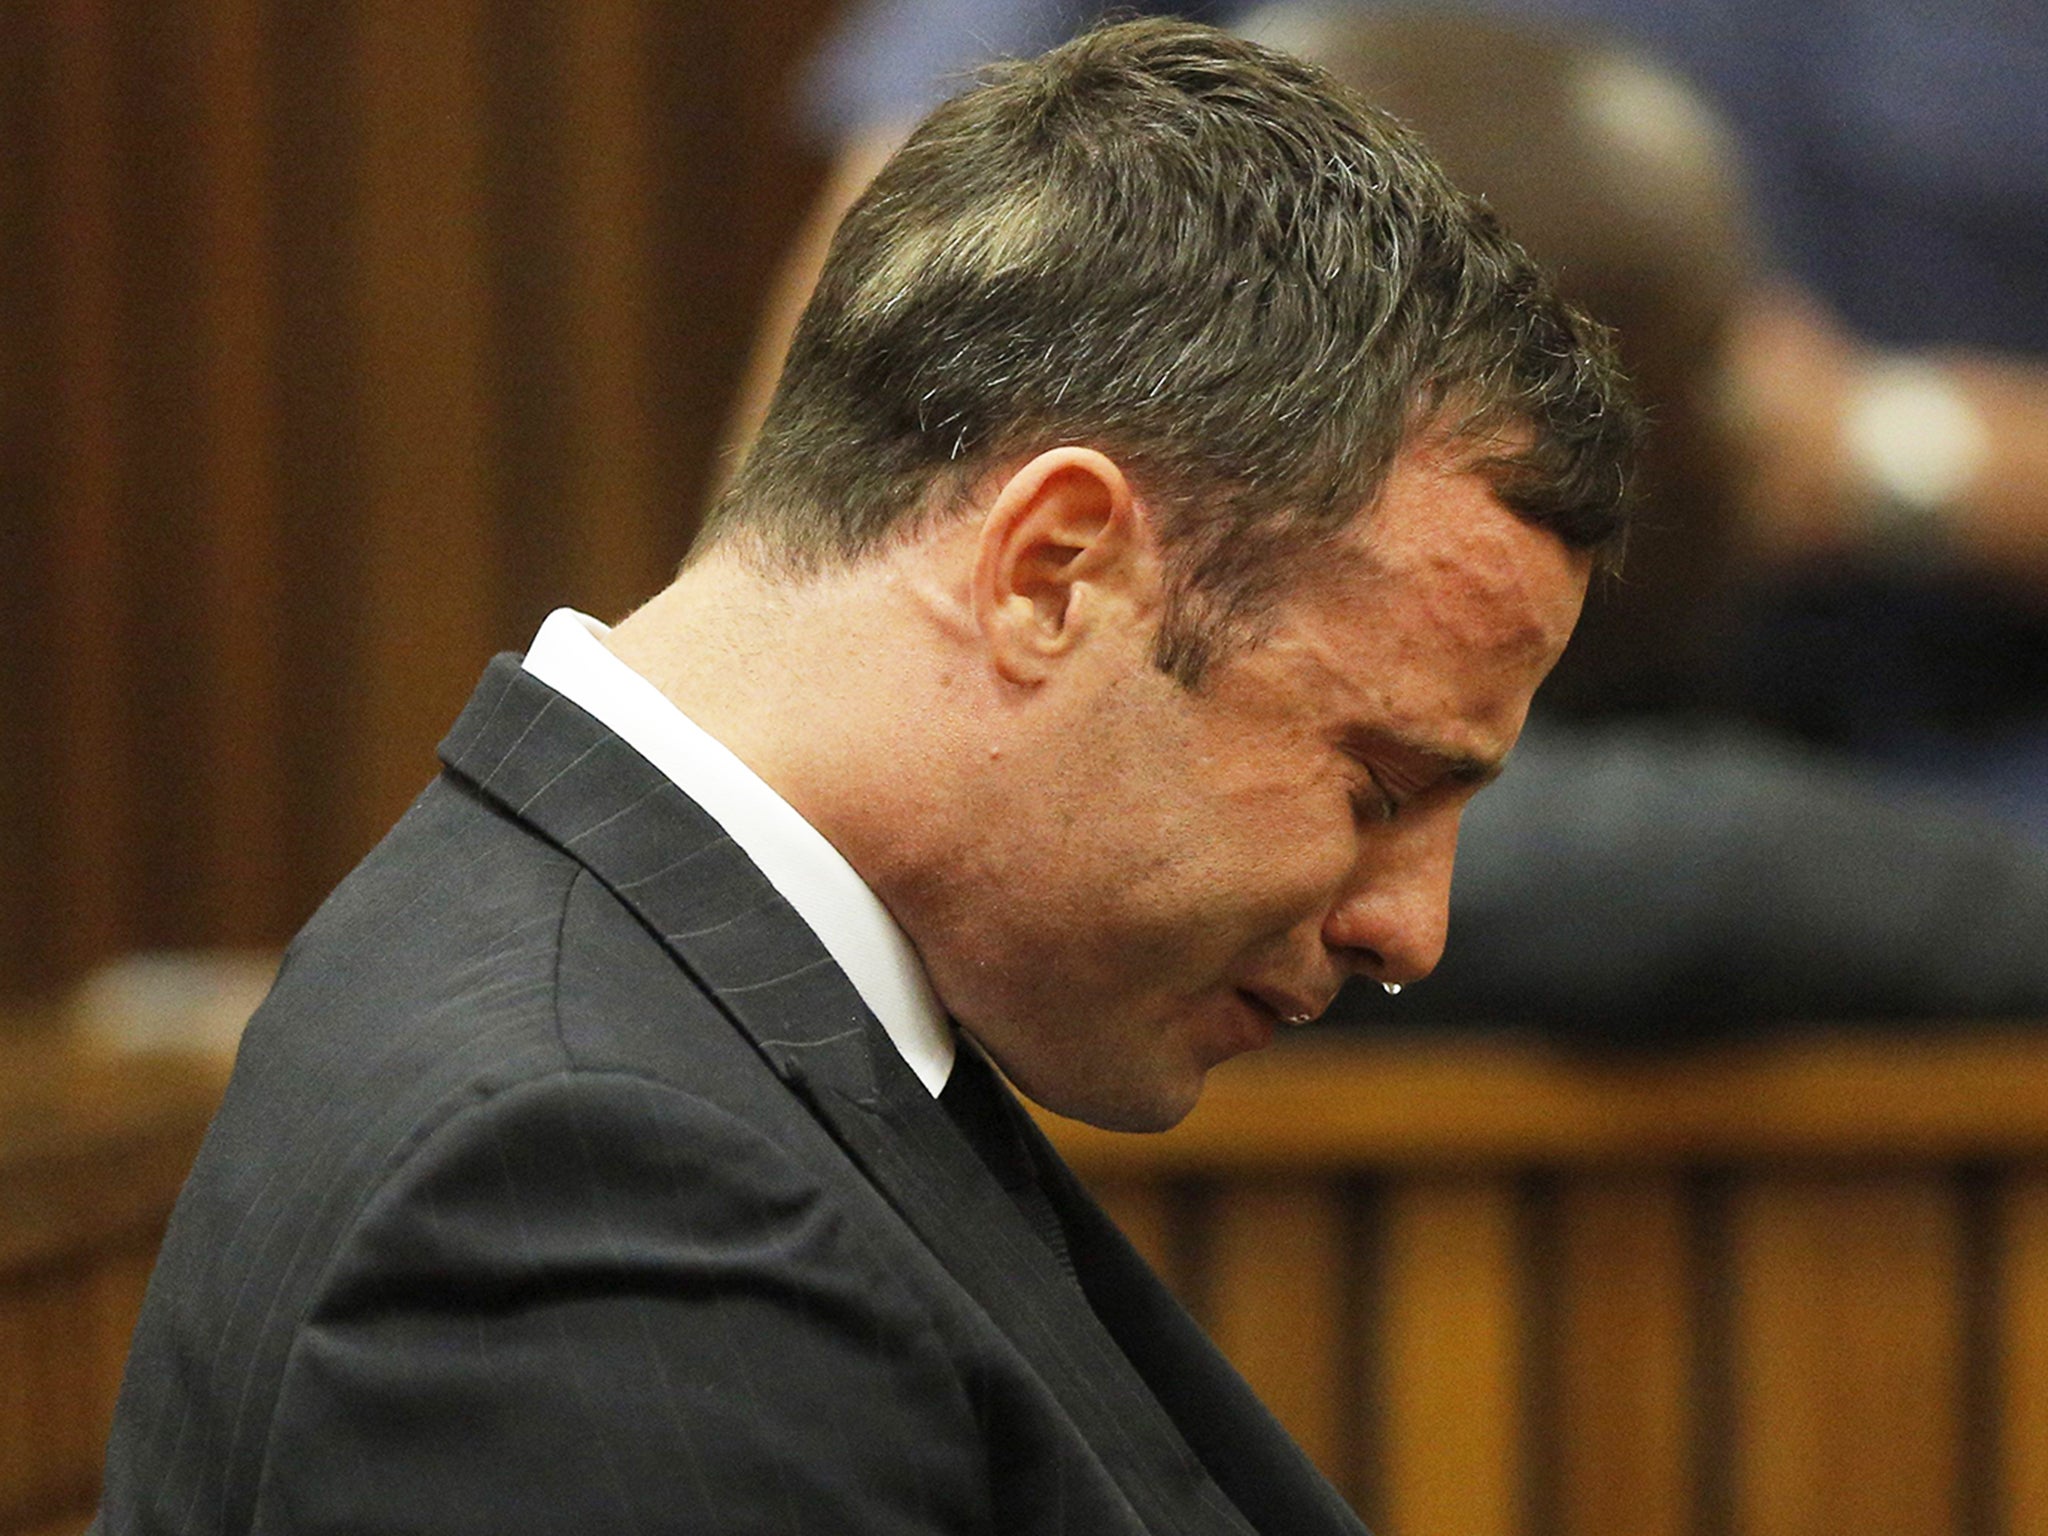 Oscar Pistorius cries as the judge reads out the verdict during his murder trial